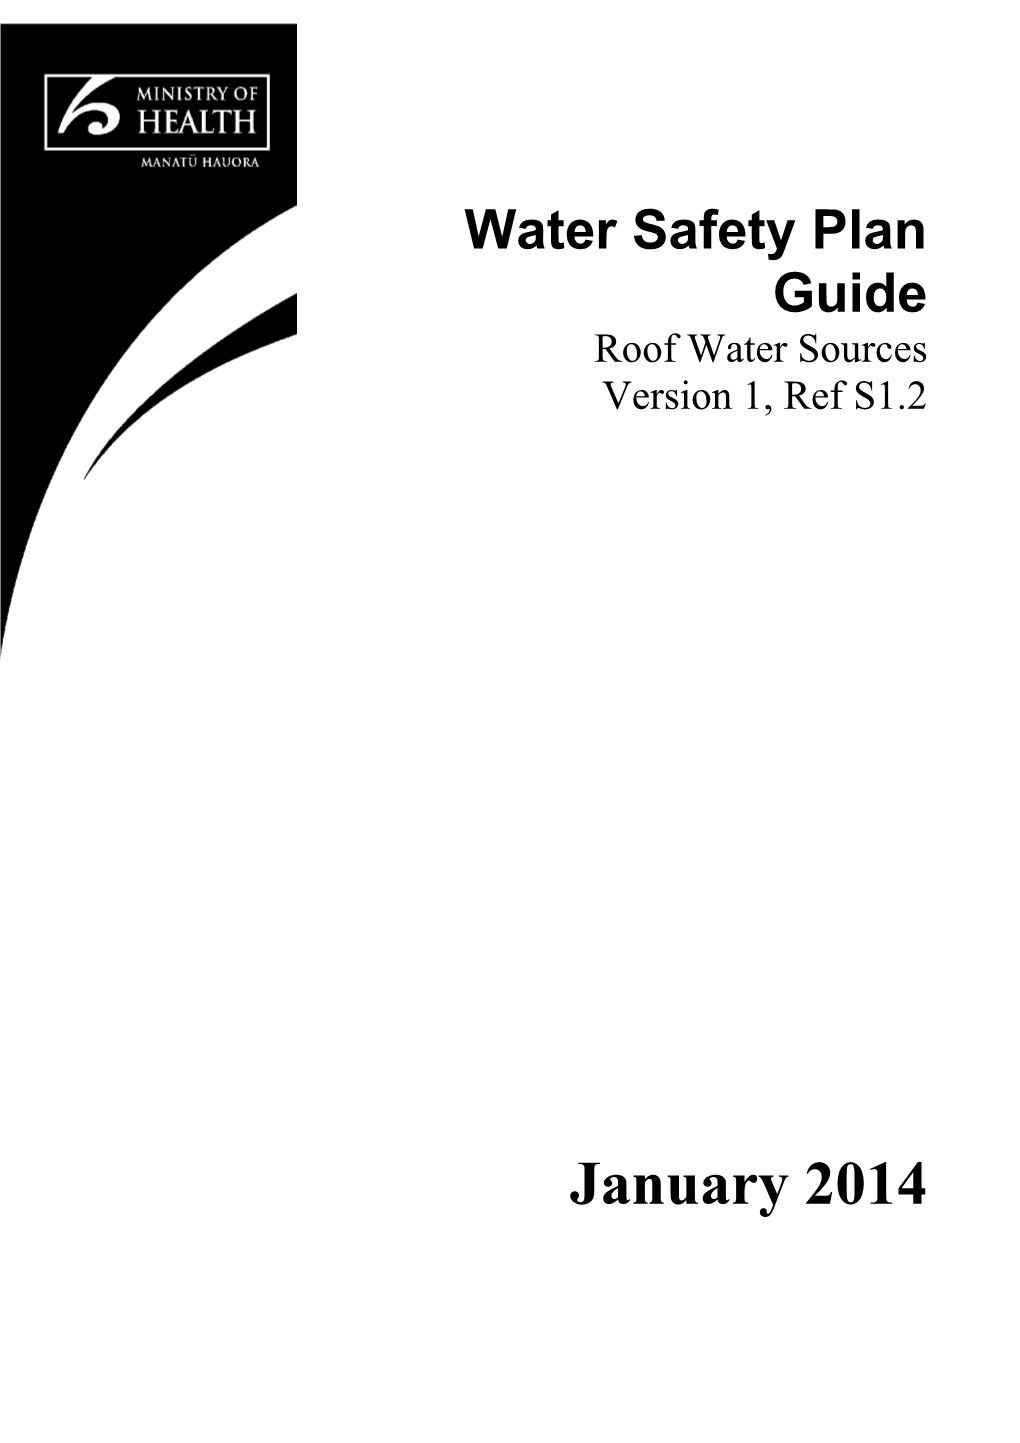 Water Safety Plan Guide: Roof Water Sources